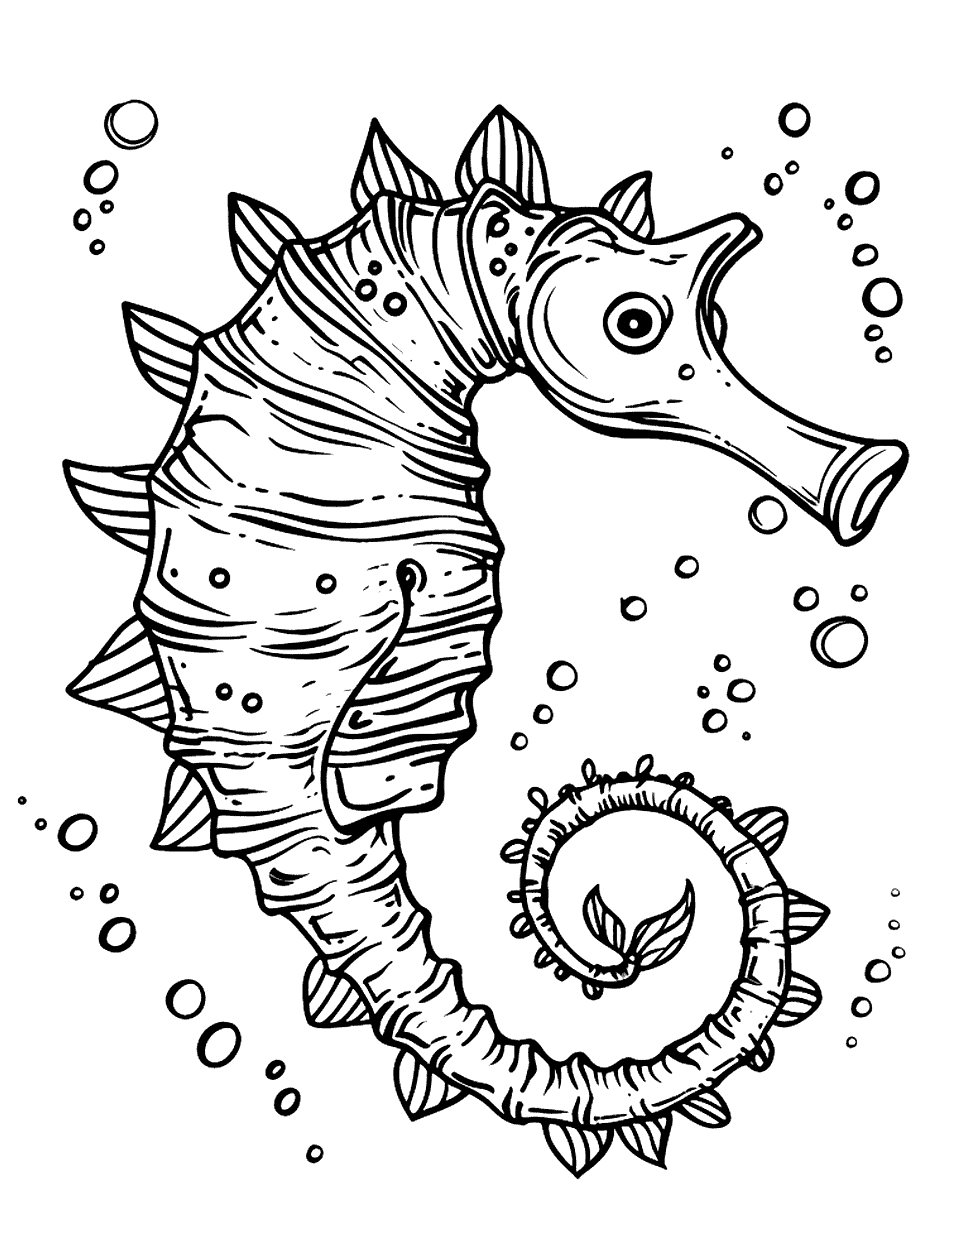 Seahorse Riding the Current Sea Creature Coloring Page - A seahorse drifting along the current with its tail curled.